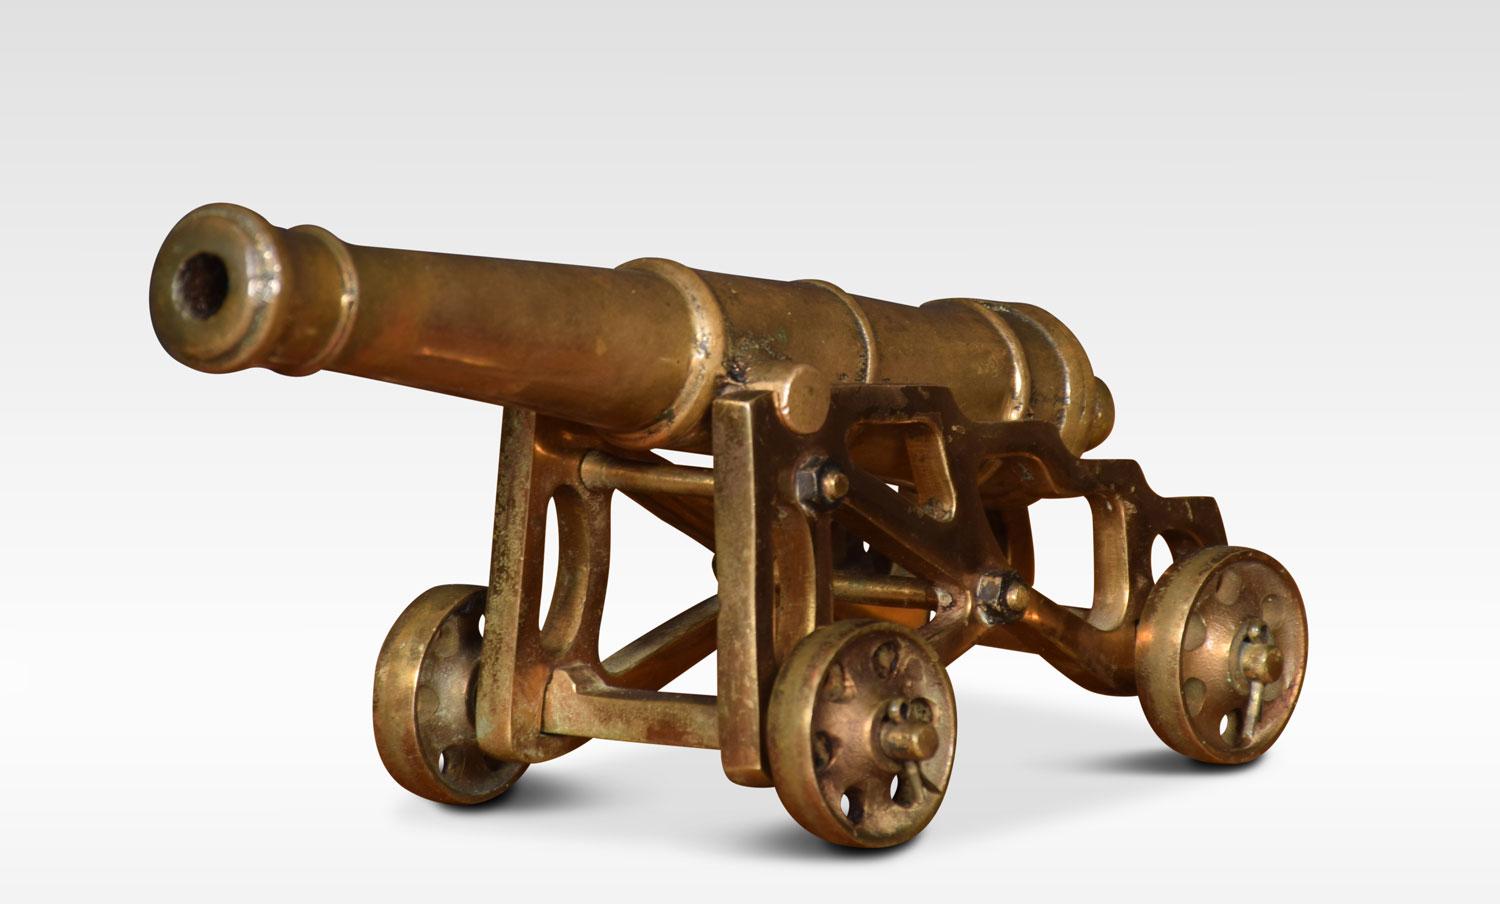 Early 19th century cast brass desk cannon having four wheel openwork garrison carriage.
Dimensions
Height 4.5 inches
Length 9 inches
Width 4.5 inches.